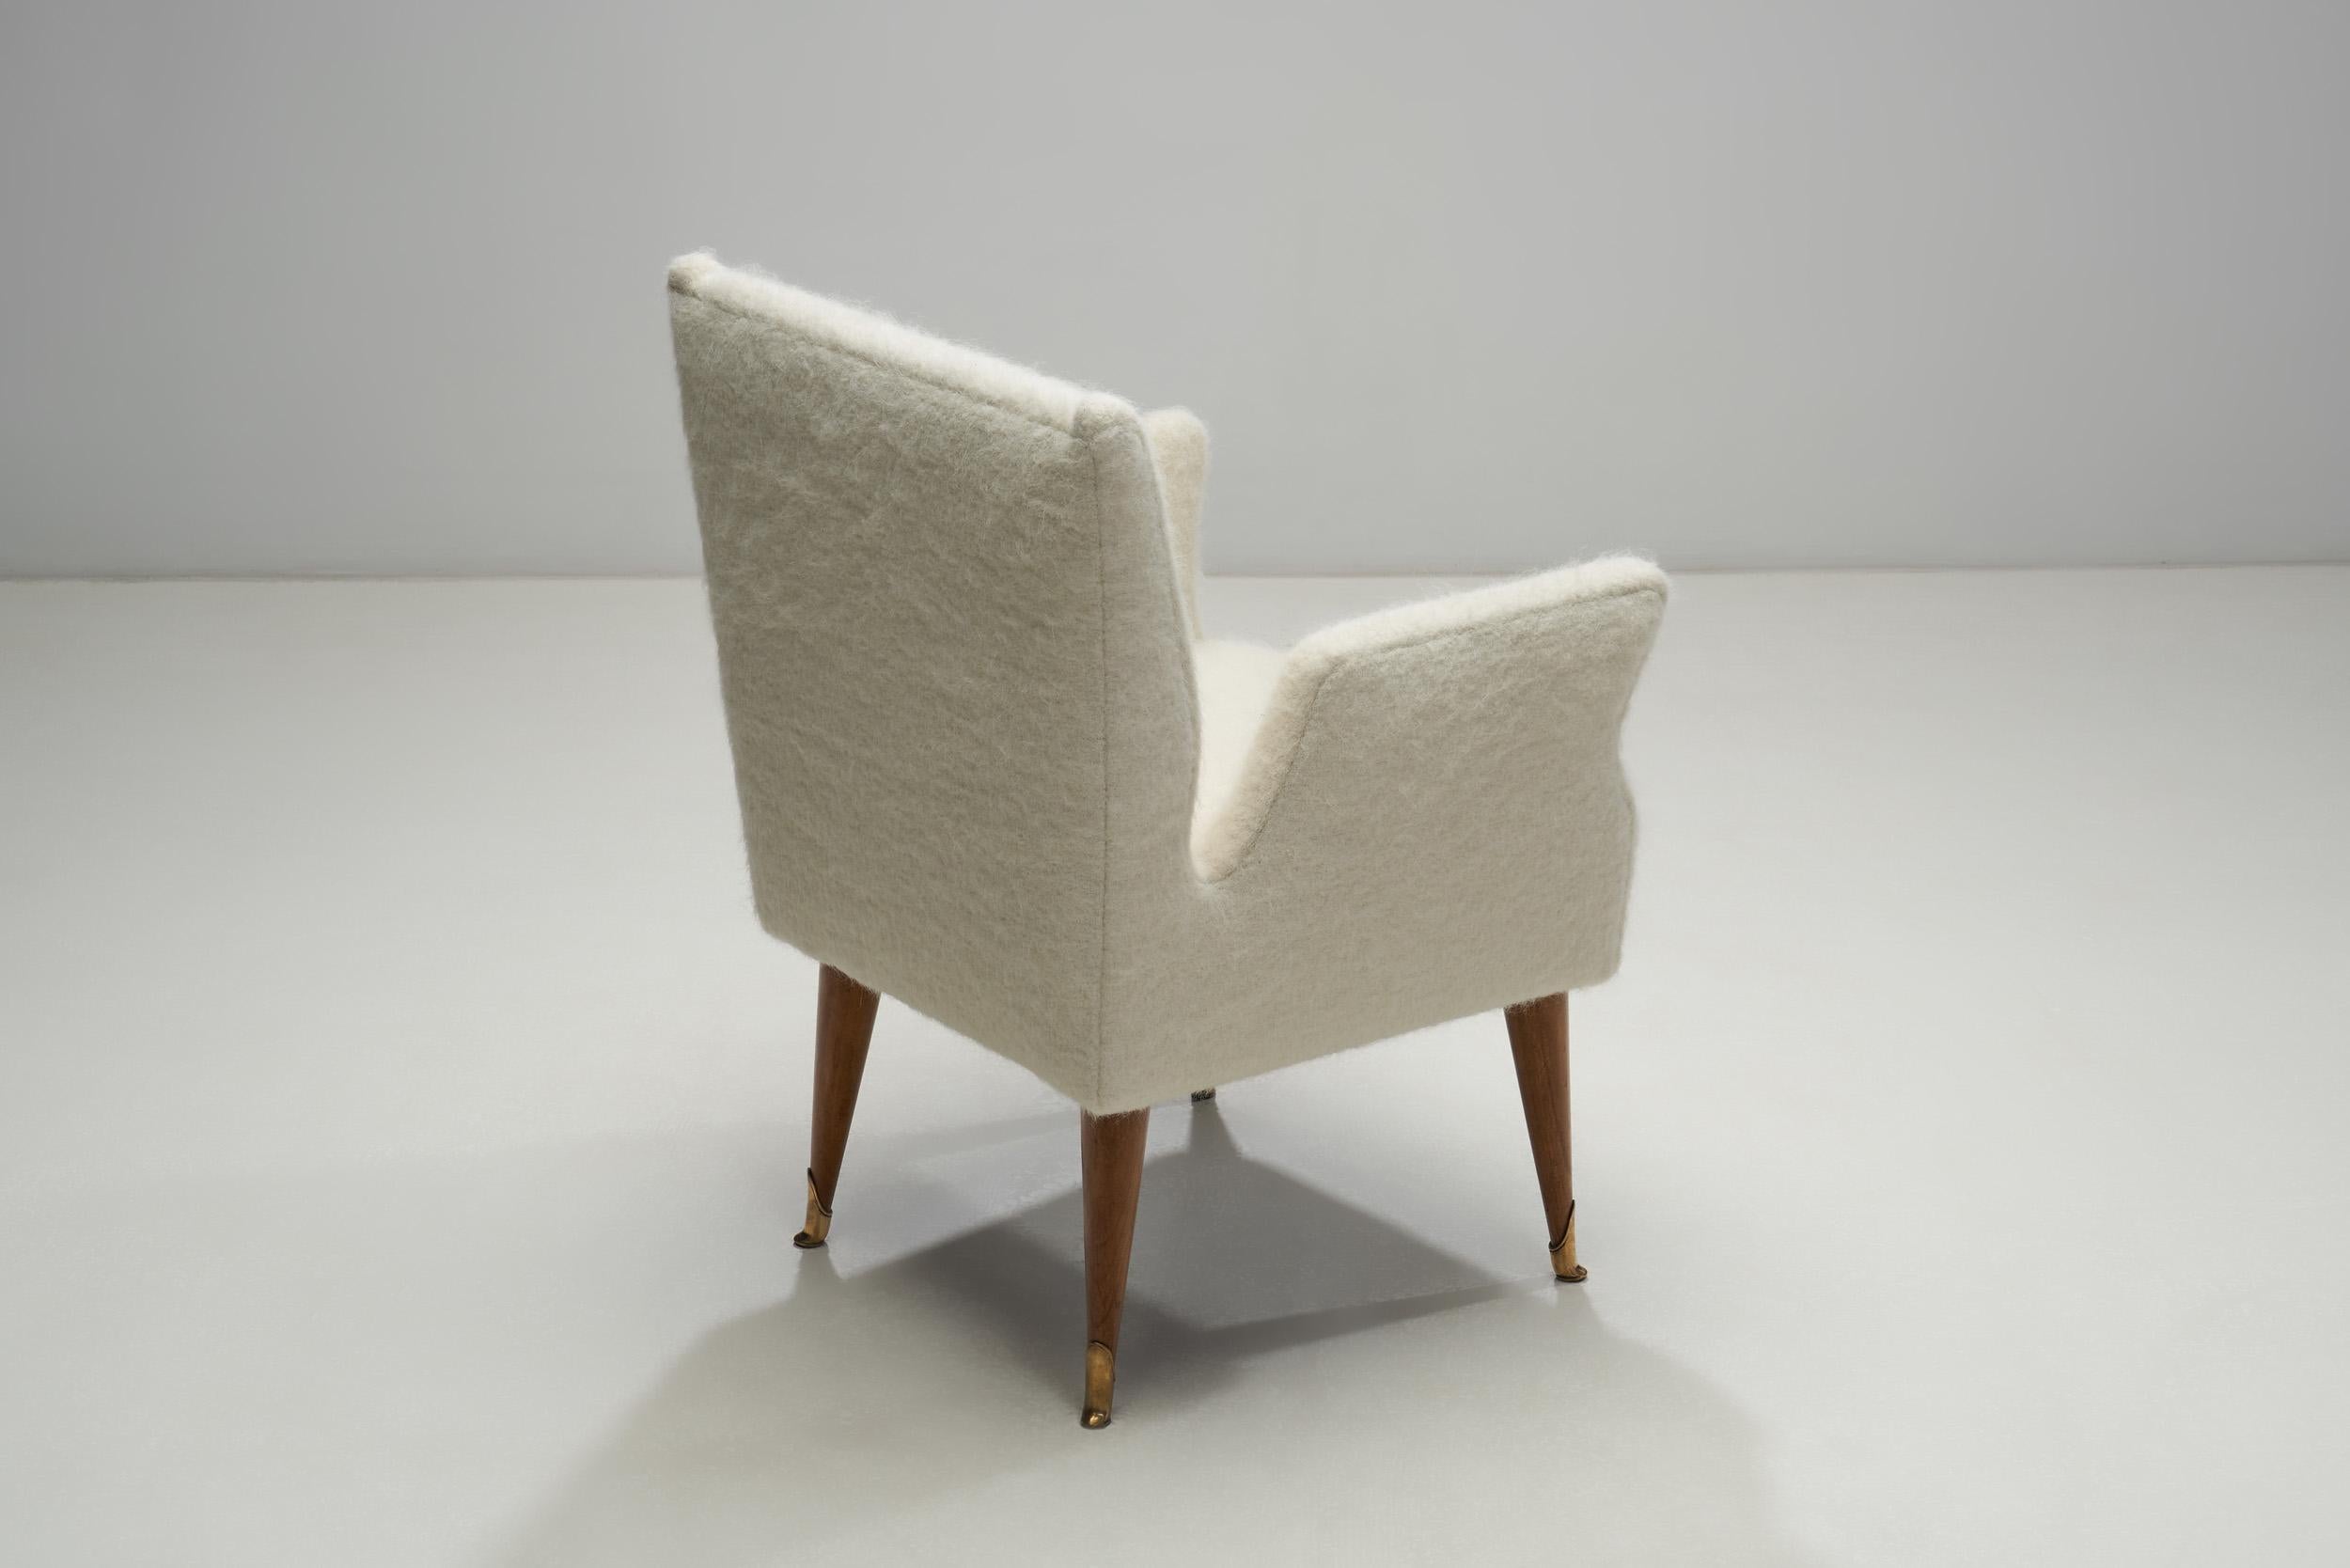 Fabric Italian Modern Lounge Chairs Attributed to Melchiorre Bega, Italy ca 1950s For Sale